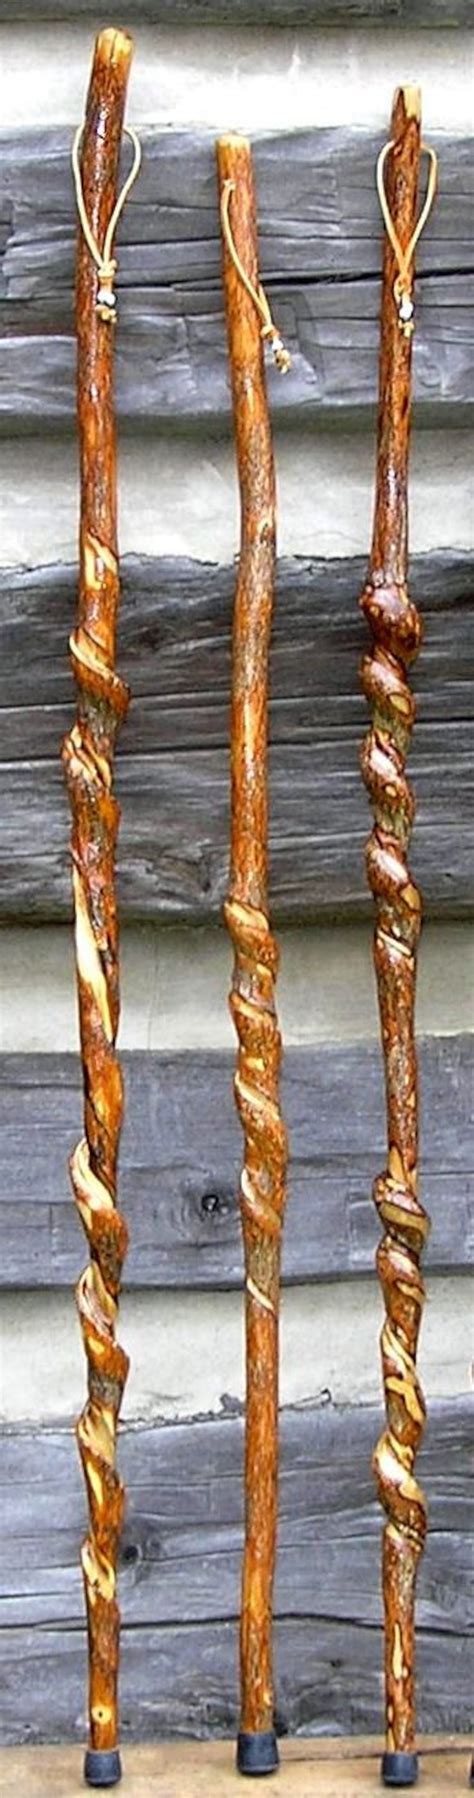 Curledtwisted Walking Sticks 50 55 Inches Tall Etsy Etsy